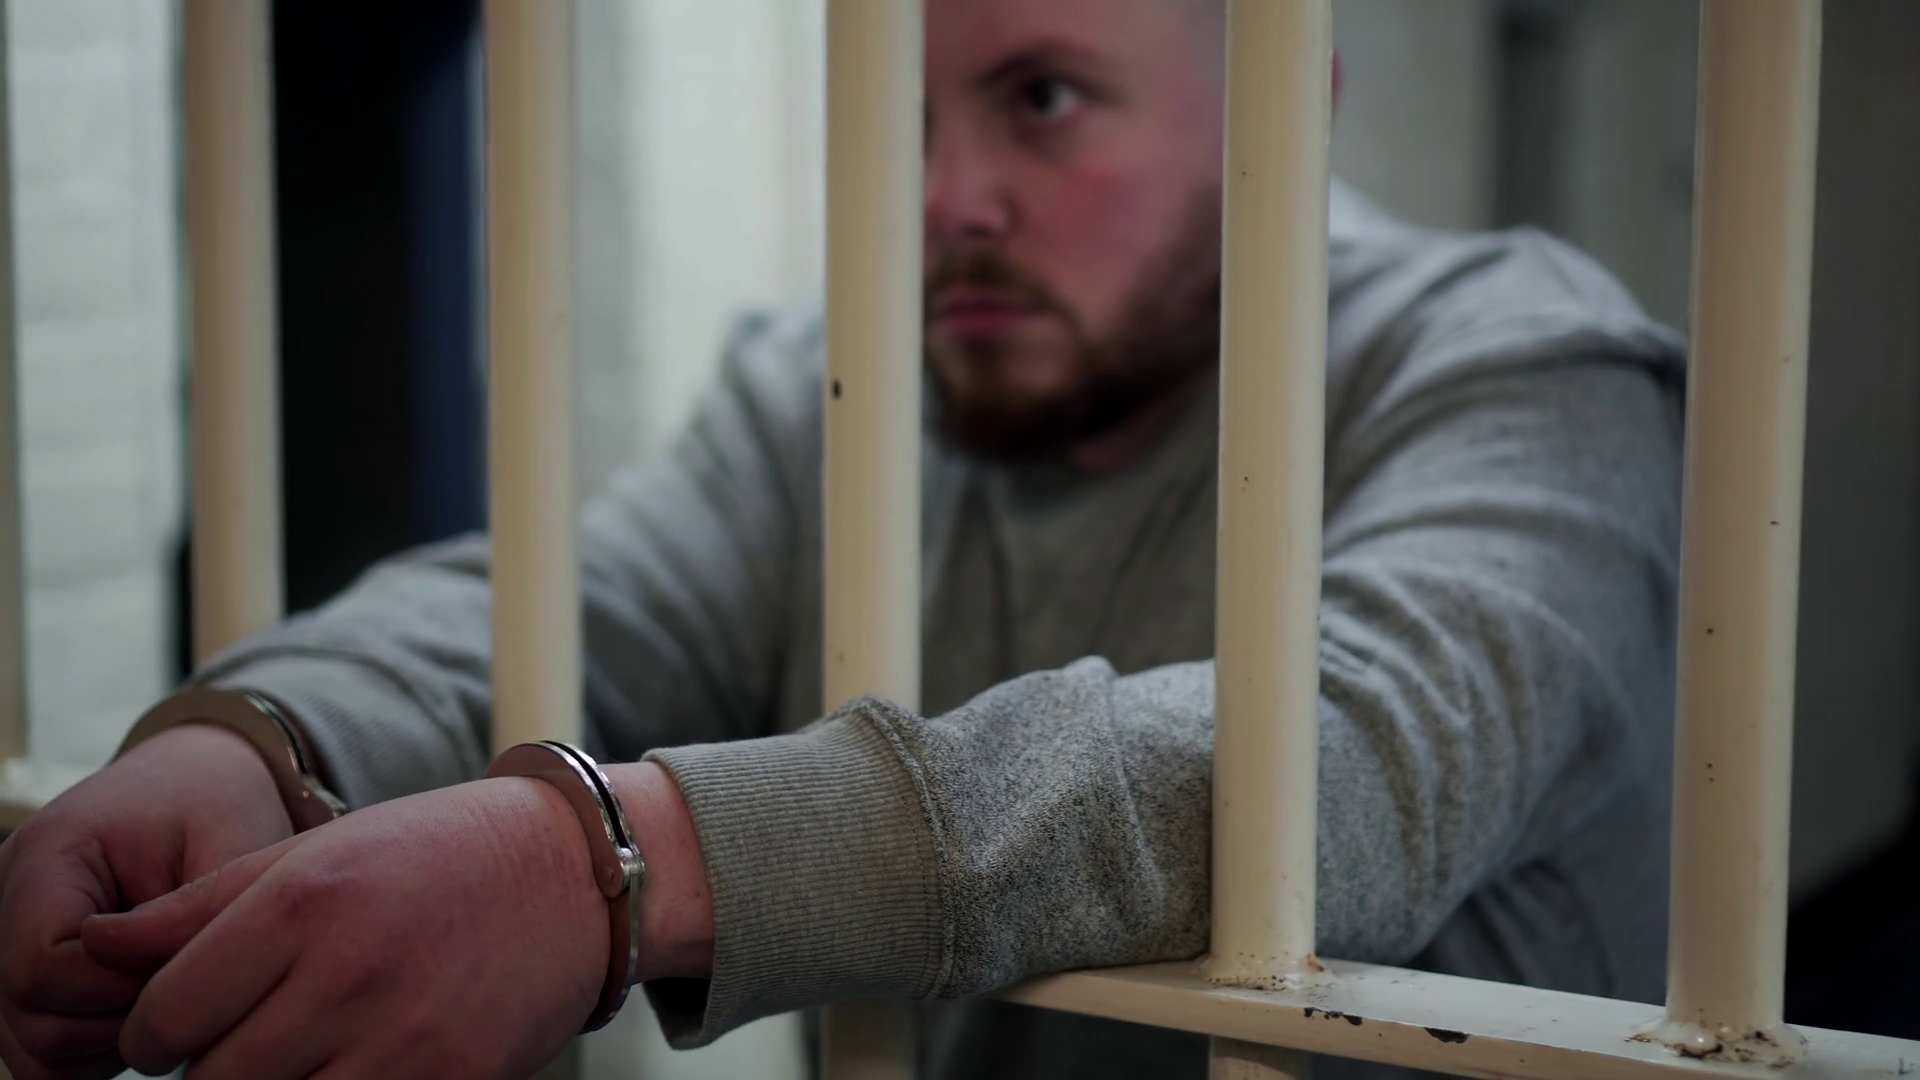 Person Behind Bars PNG - 154951